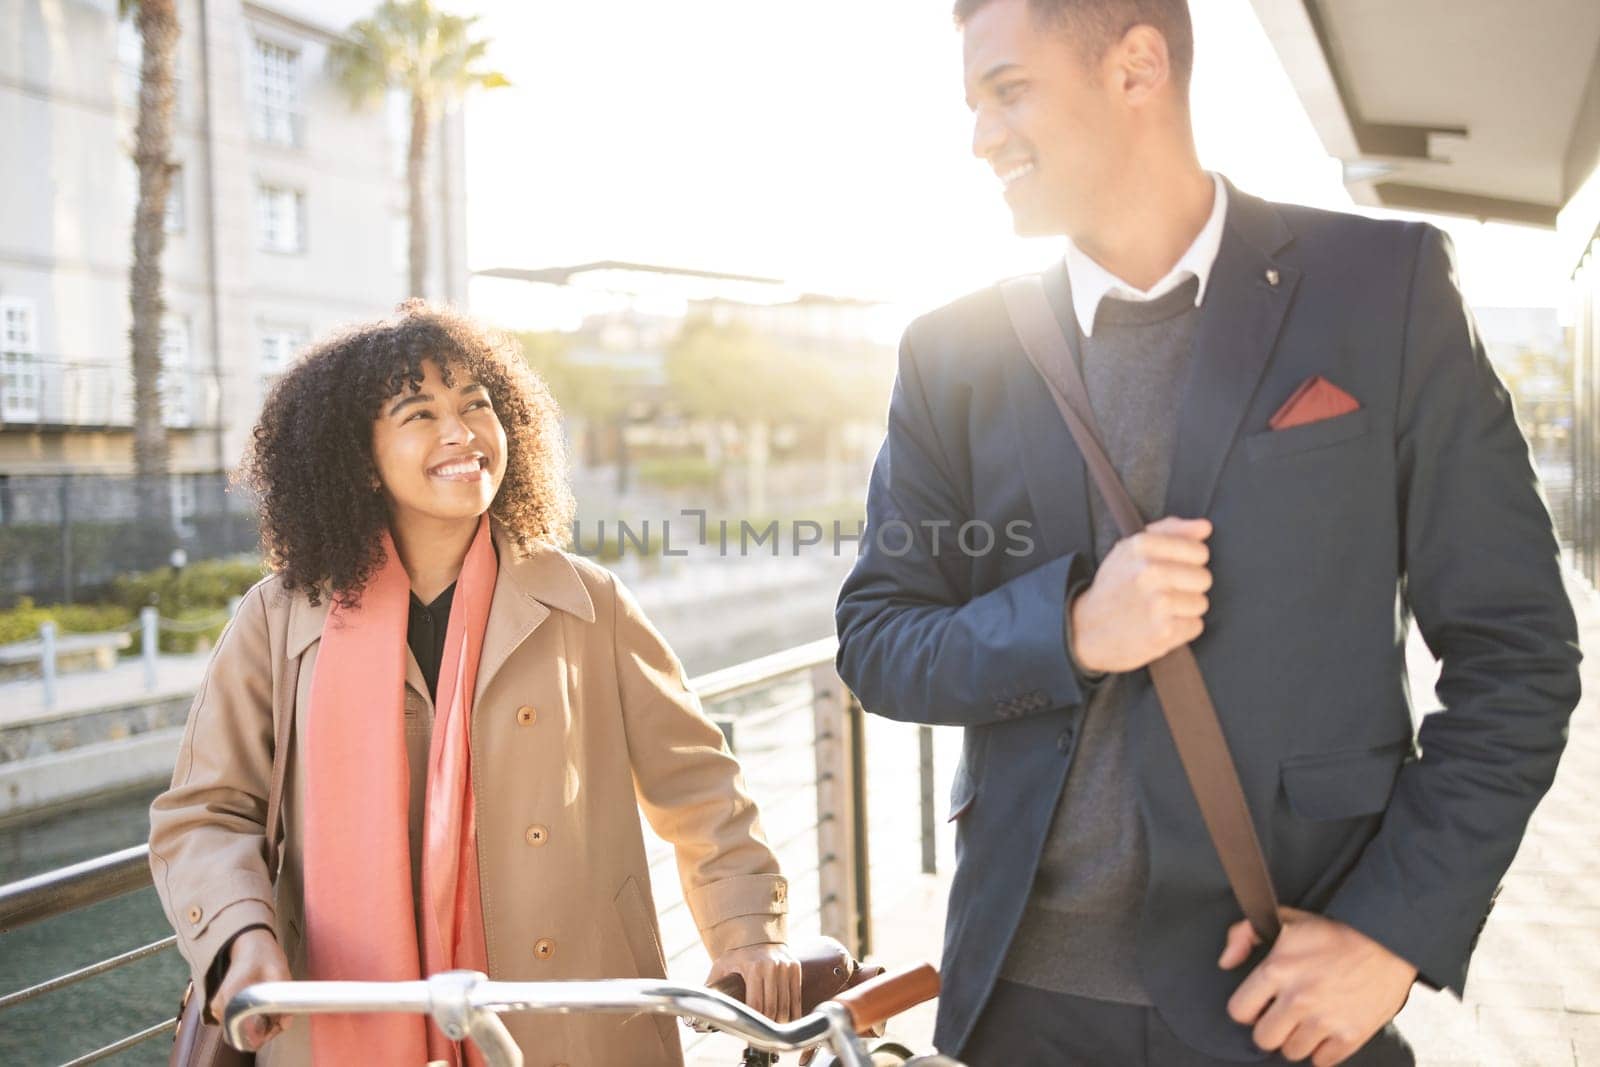 Bicycle travel, walking or business people cycling to work, corporate job or relax journey in San Francisco city. Talking, conversation or happy partnership team with eco friendly transportation bike.